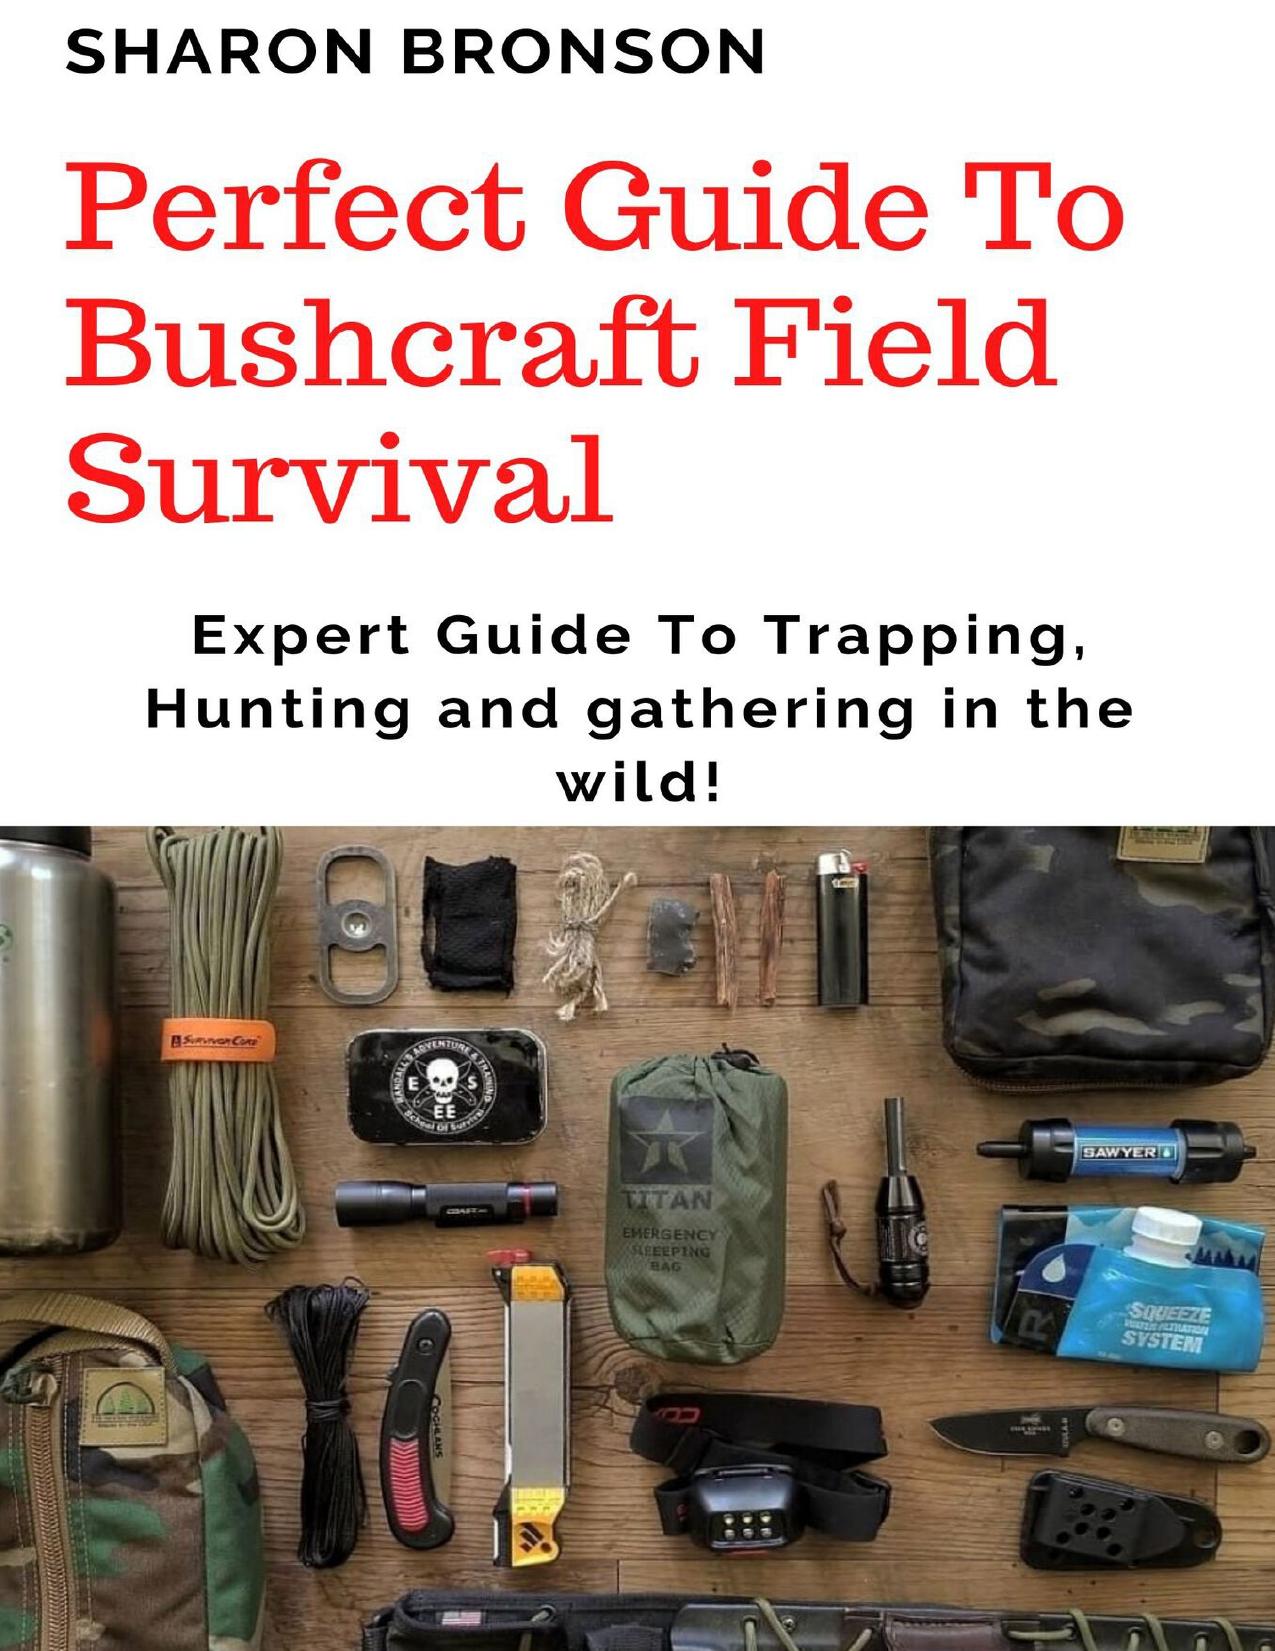 Perfect Guide To Bushcraft Field Survival_ Expert Guide To Trapping, Hunting and gathering in the wild!.jpg